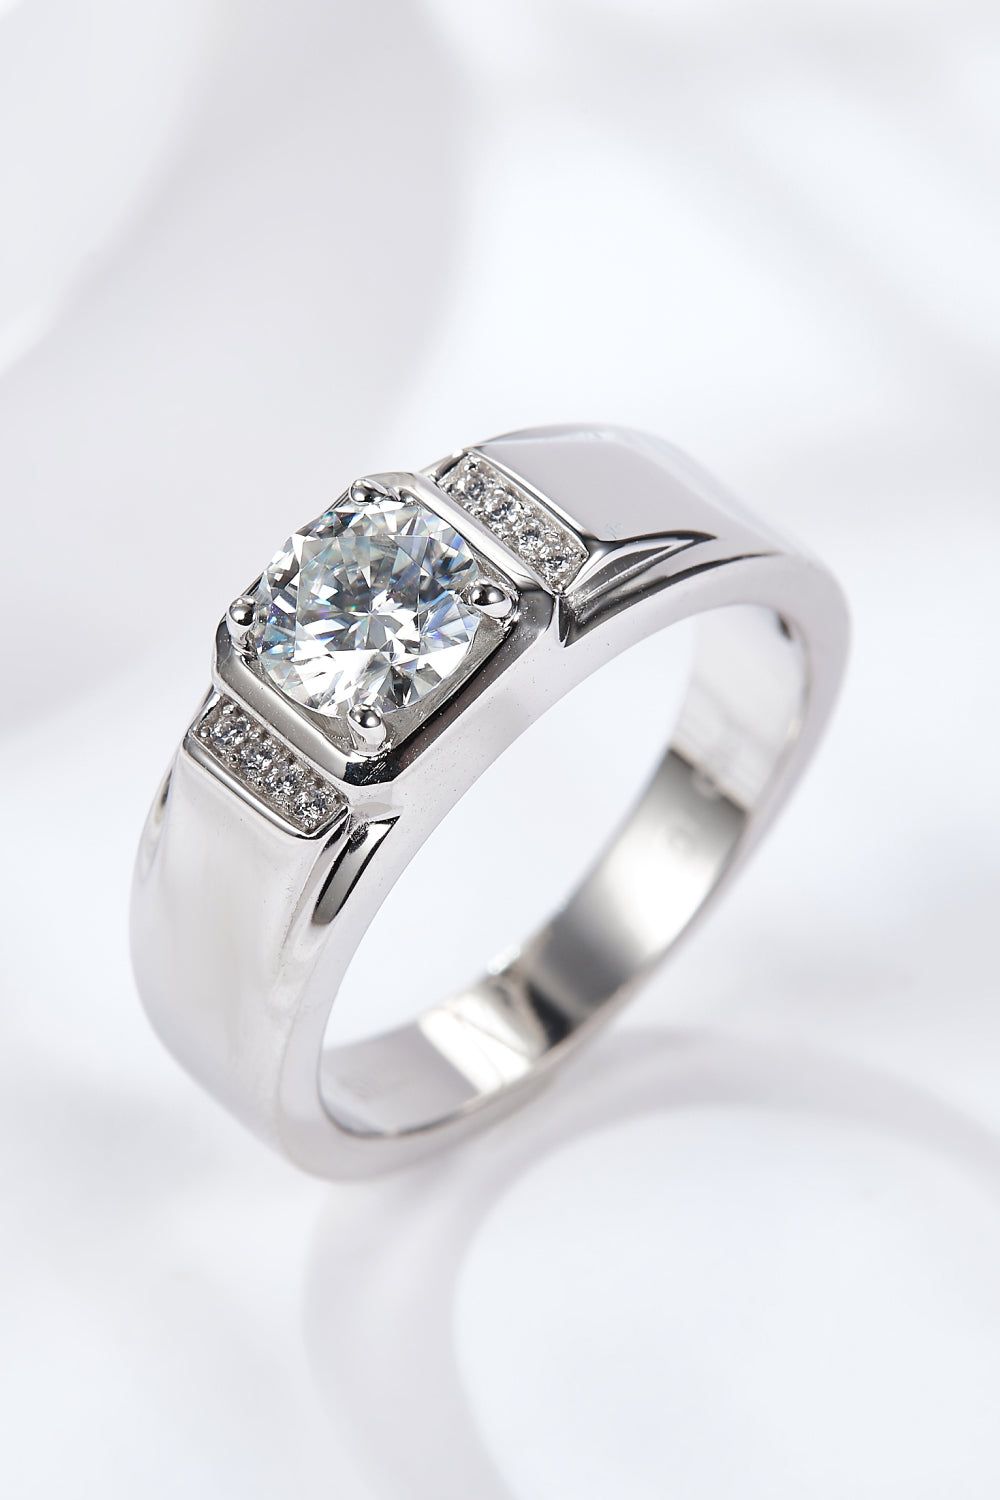 From The Heart 1 Carat Moissanite Ring - DromedarShop.com Online Boutique